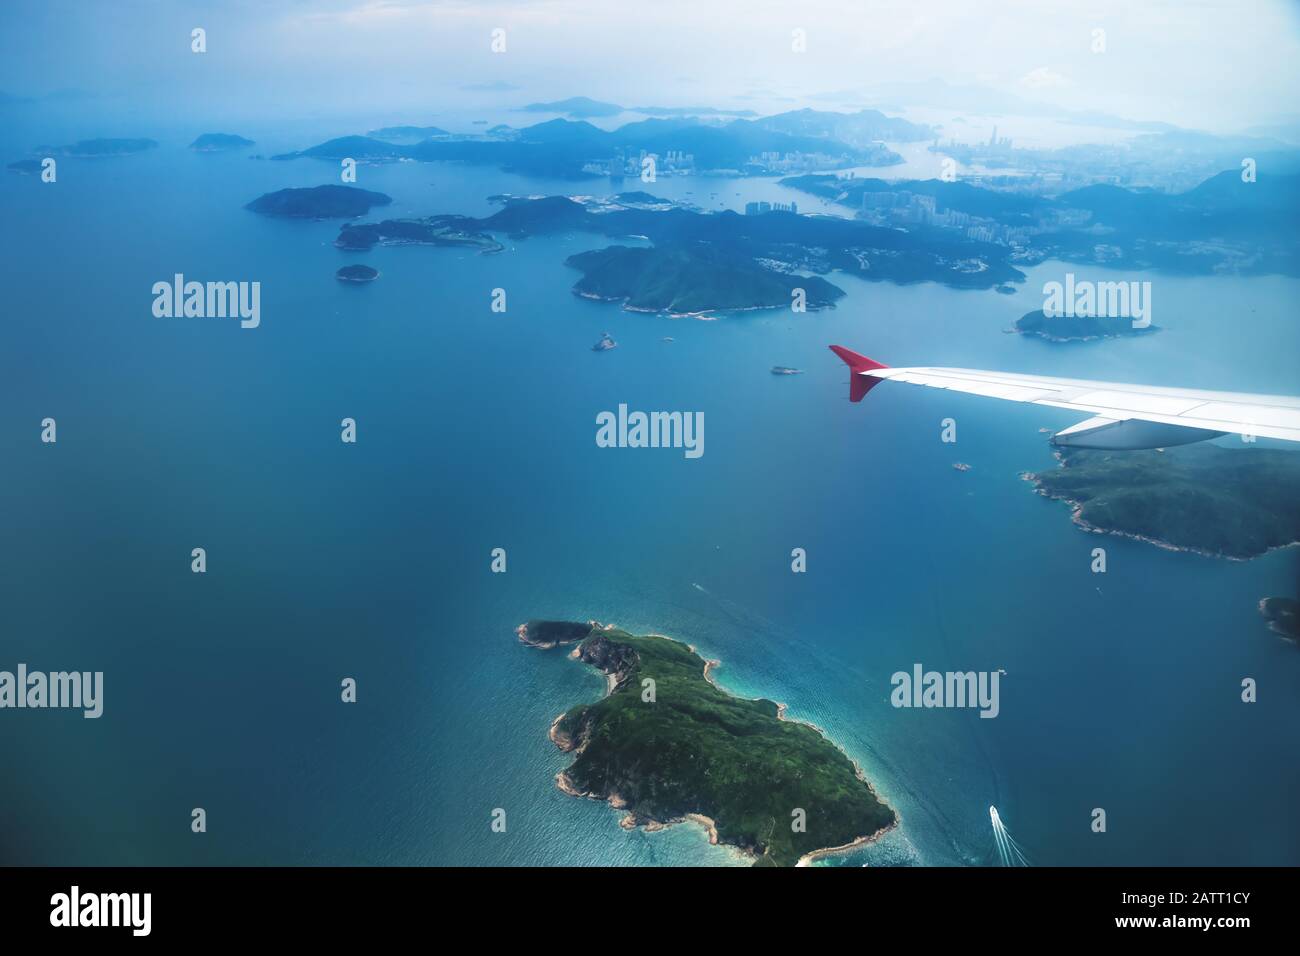 Aerial view of Hong Kong islands from a flying airplane with wing, China Stock Photo